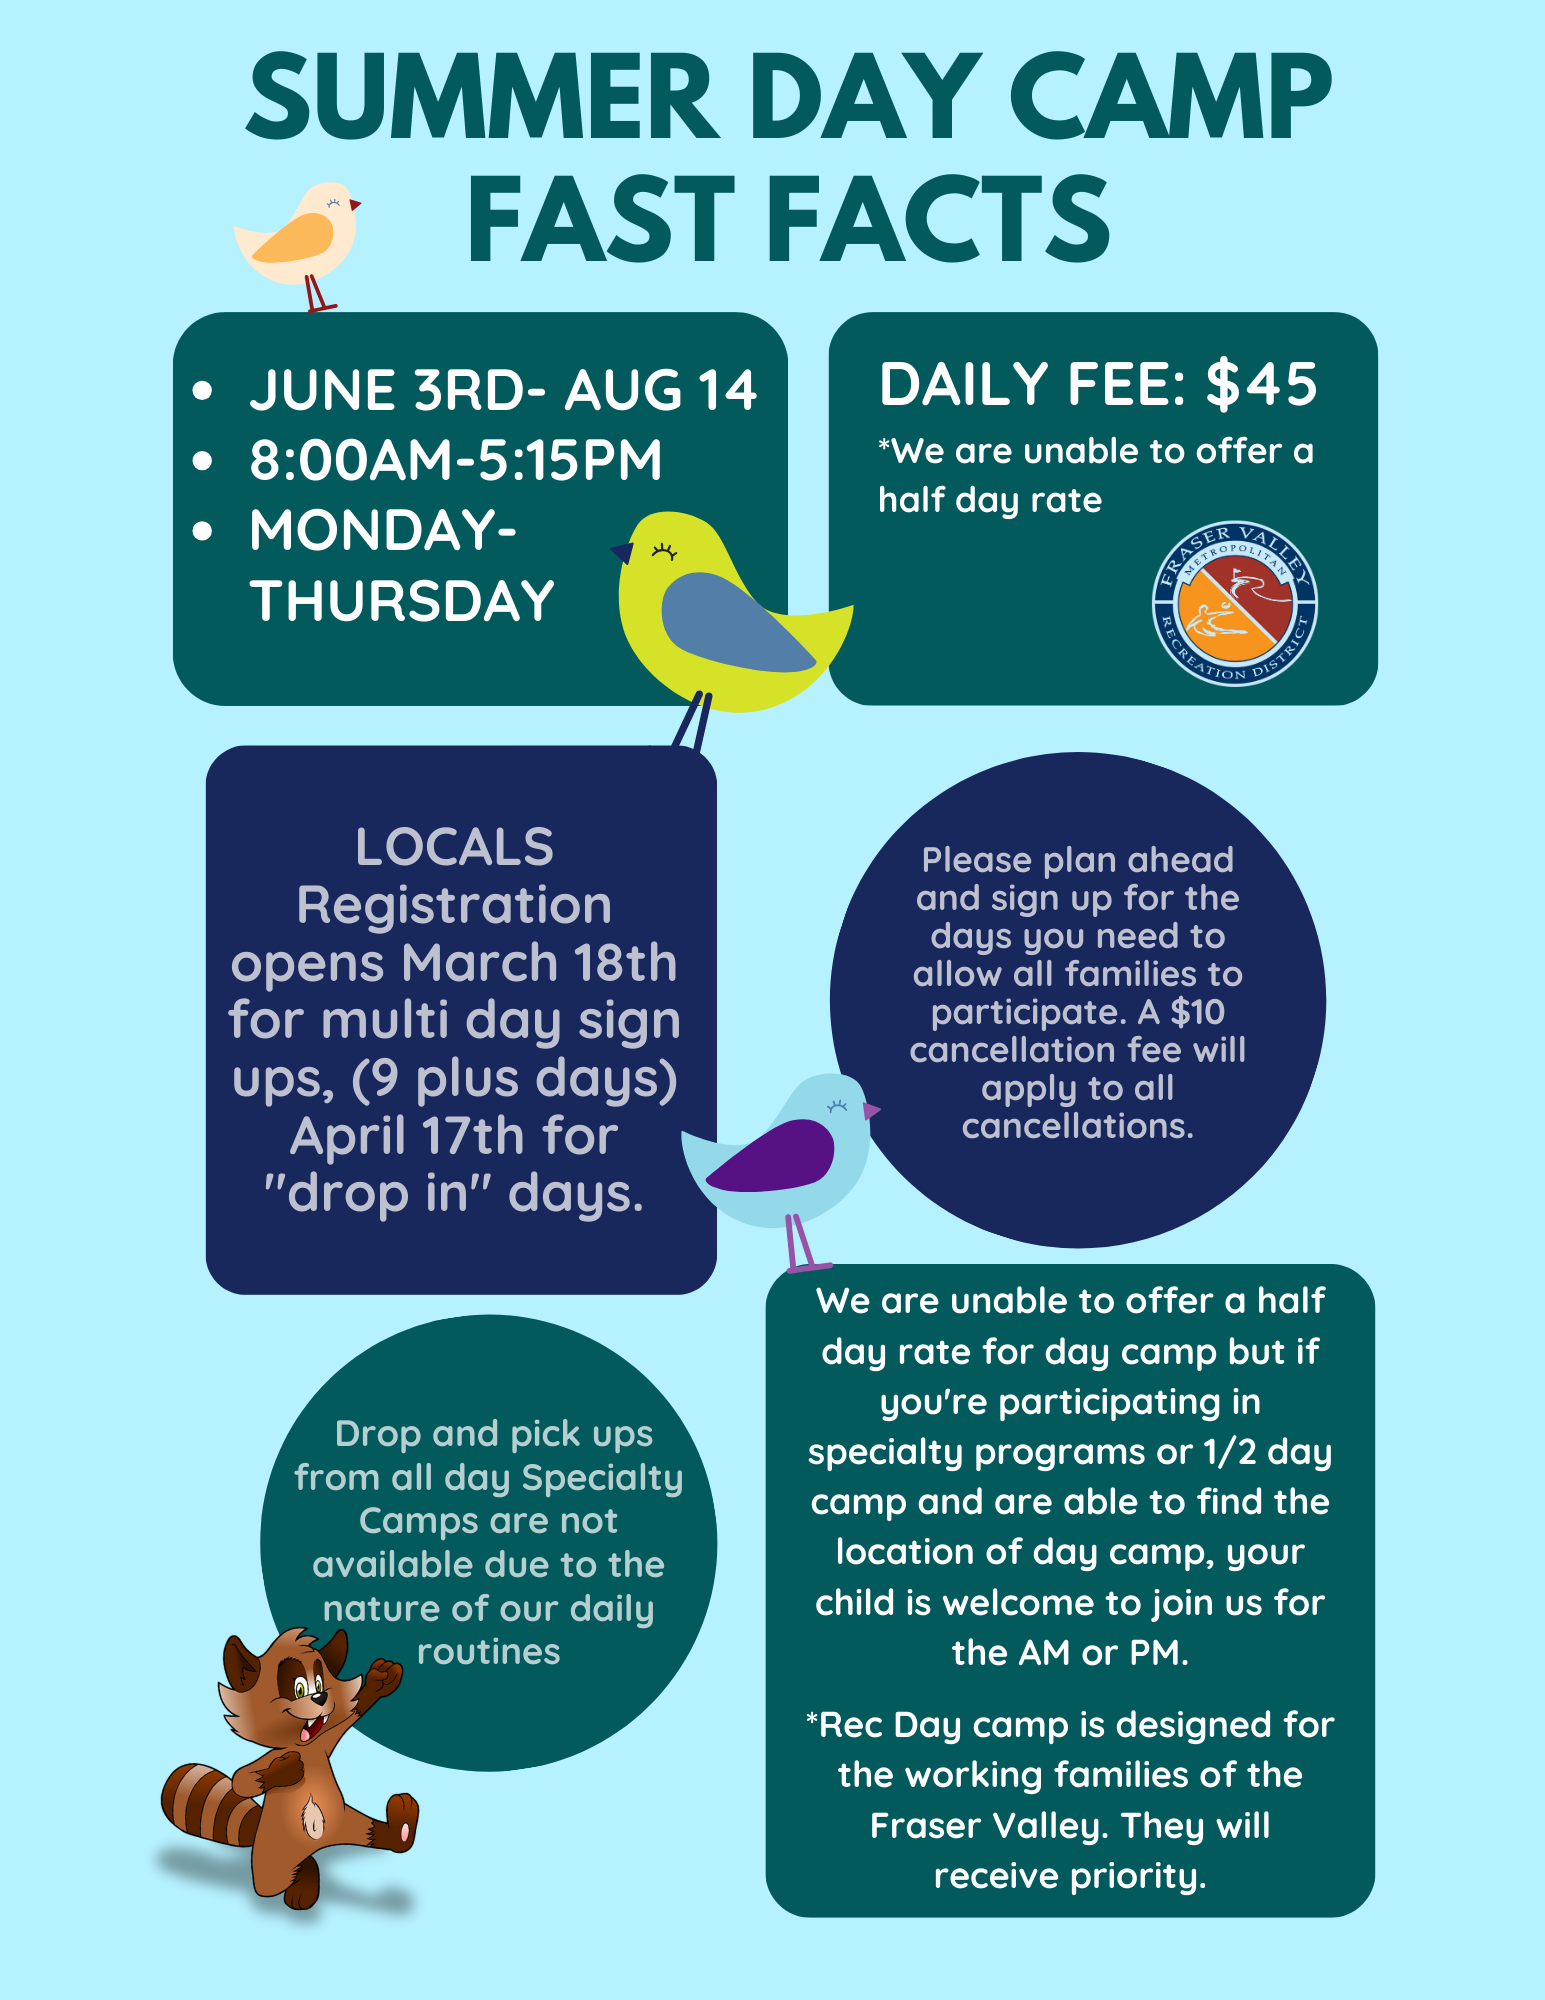 Informative flyer for a Summer Day Camp detailing the dates from June 3rd to August 14th, open Monday through Thursday from 8:00 AM to 5:15 PM. It highlights the daily fee, registration dates for locals, and special instructions for drop-offs and pick-ups. The flyer emphasizes the camp is designed for the working families of the Fraser Valley, with a priority for full-day camps. It features playful graphics of birds and a raccoon, enhancing the friendly and engaging tone of the camp.